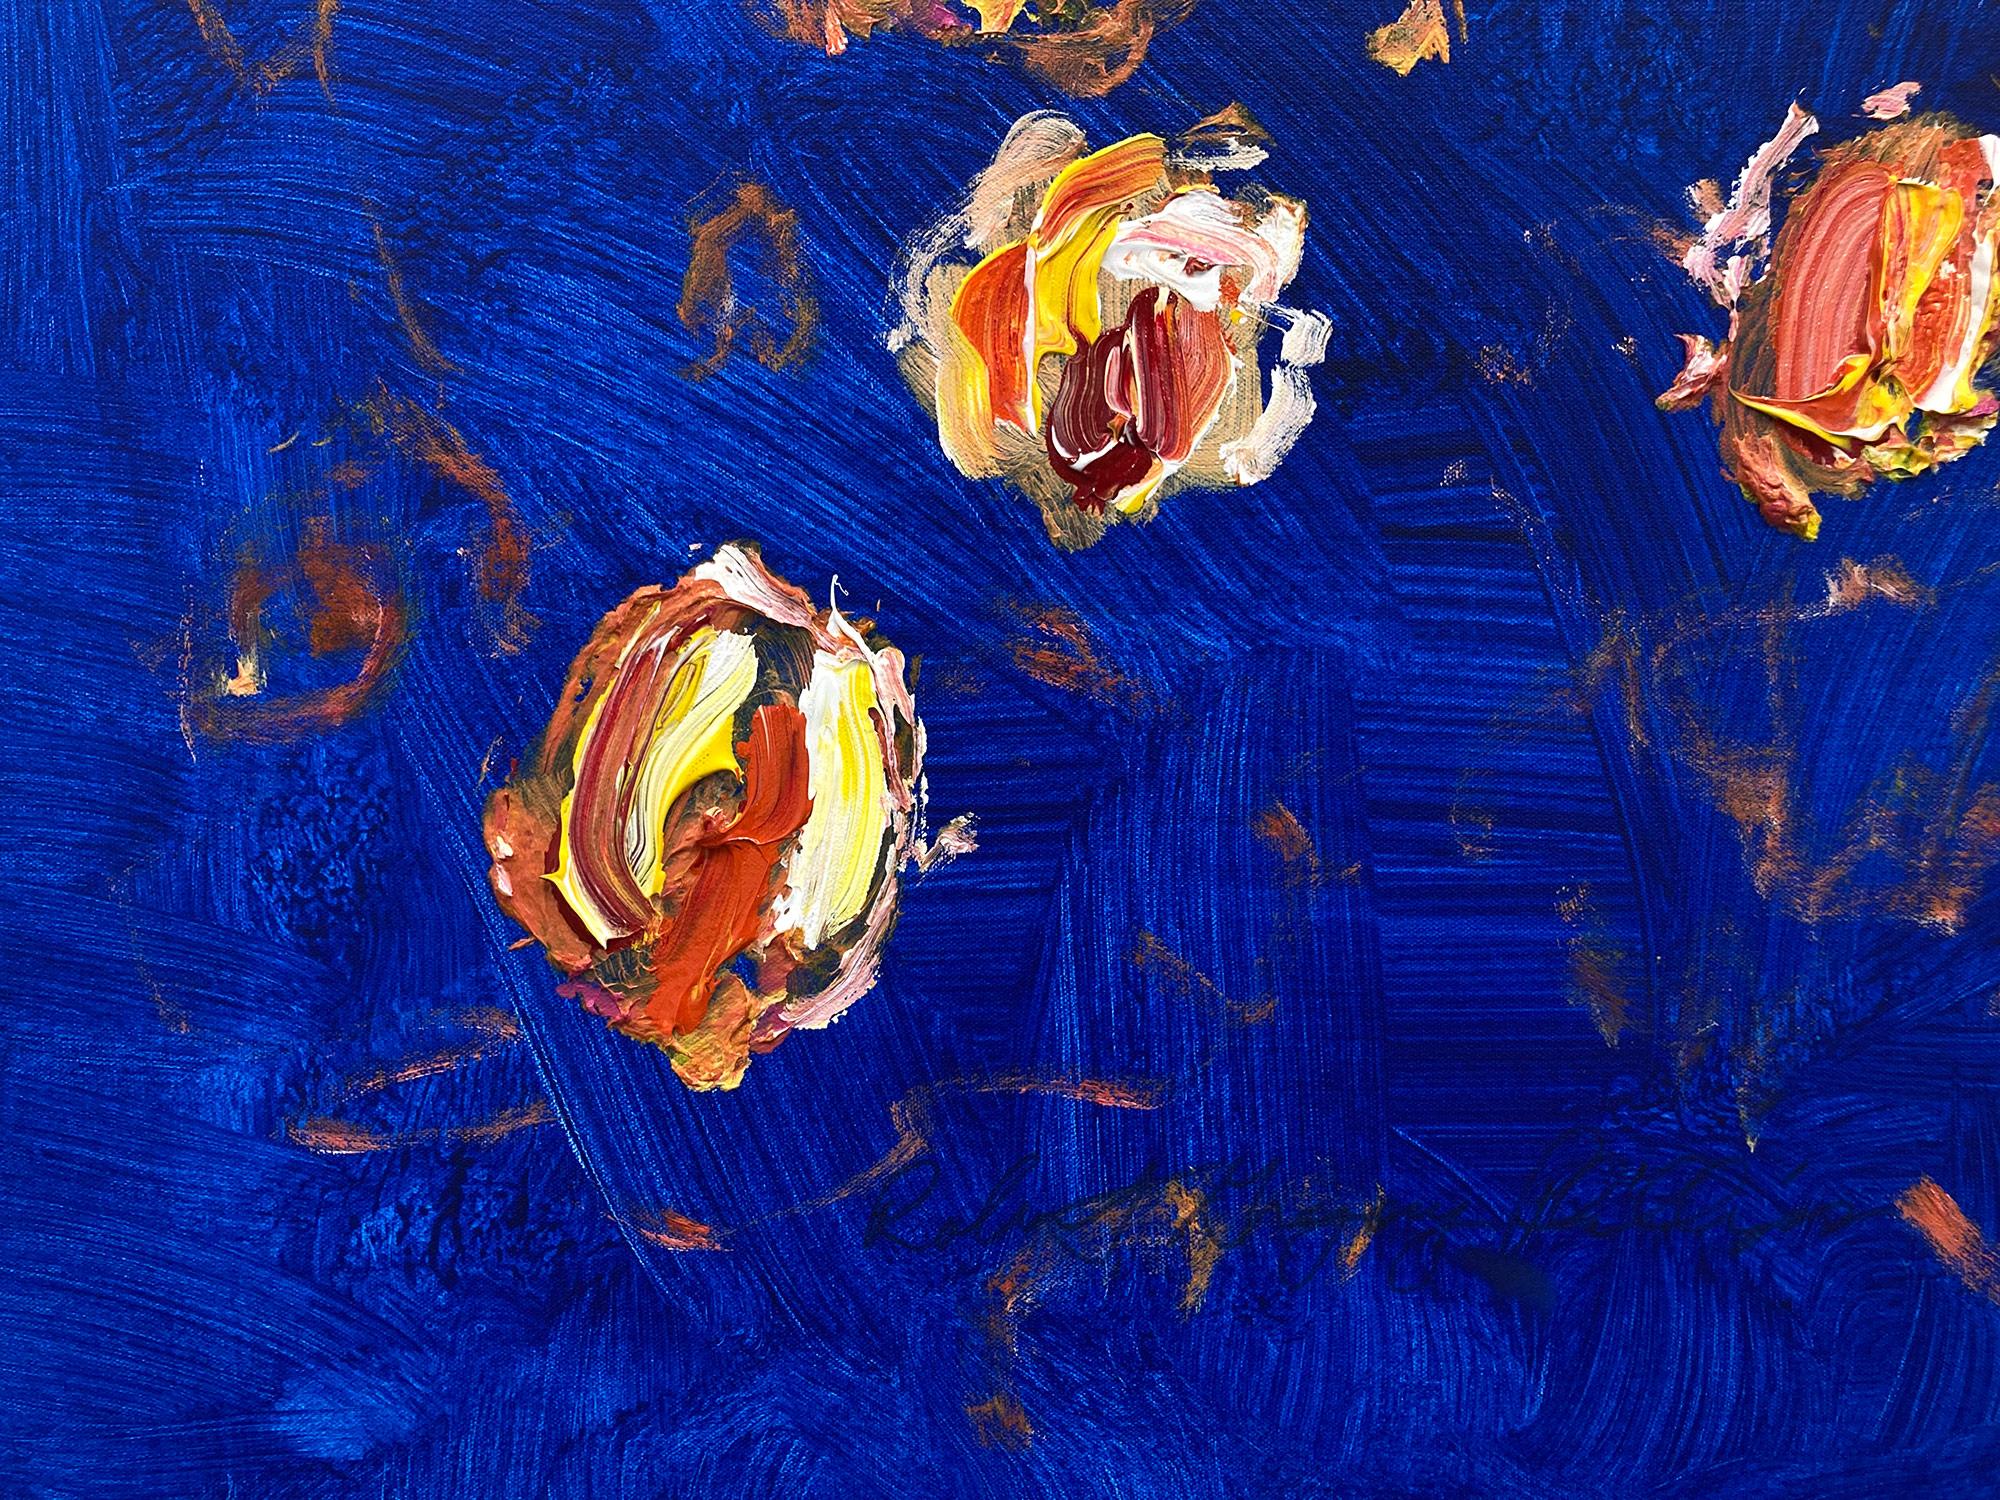 An abstract expressionist acrylic painting on canvas with wonderful color combinations of deep royal blue, yellow and effortless lines and shapes. Inspired by Claude Monet's Lilly Pads, this piece is the artists interpretation layered with paint and